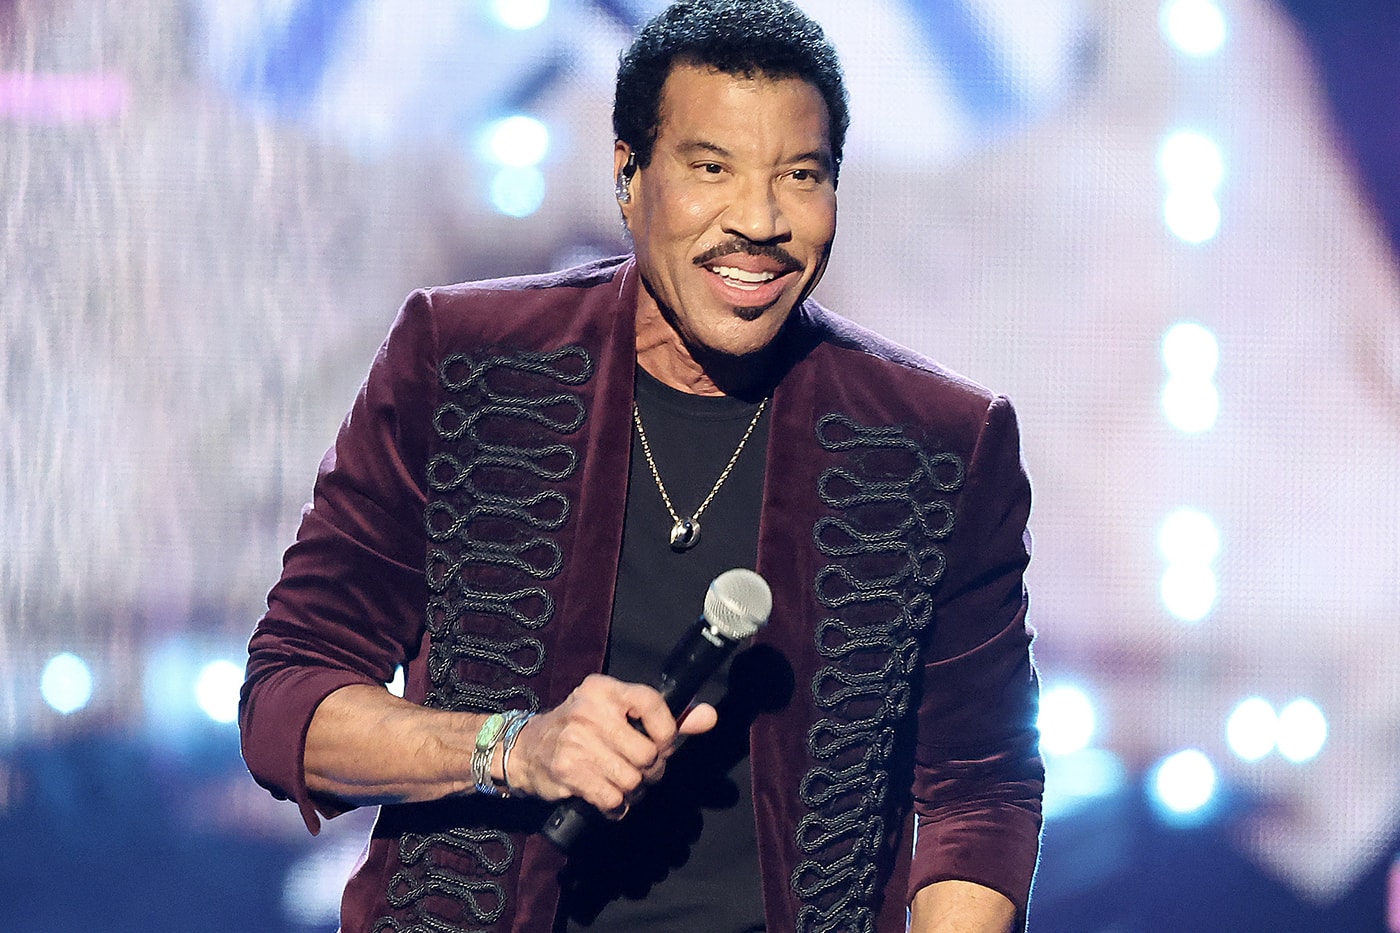 Lionel Richie Earth Wind Fire Sing A Song All Night Long 2023 Tour announcement dates Info